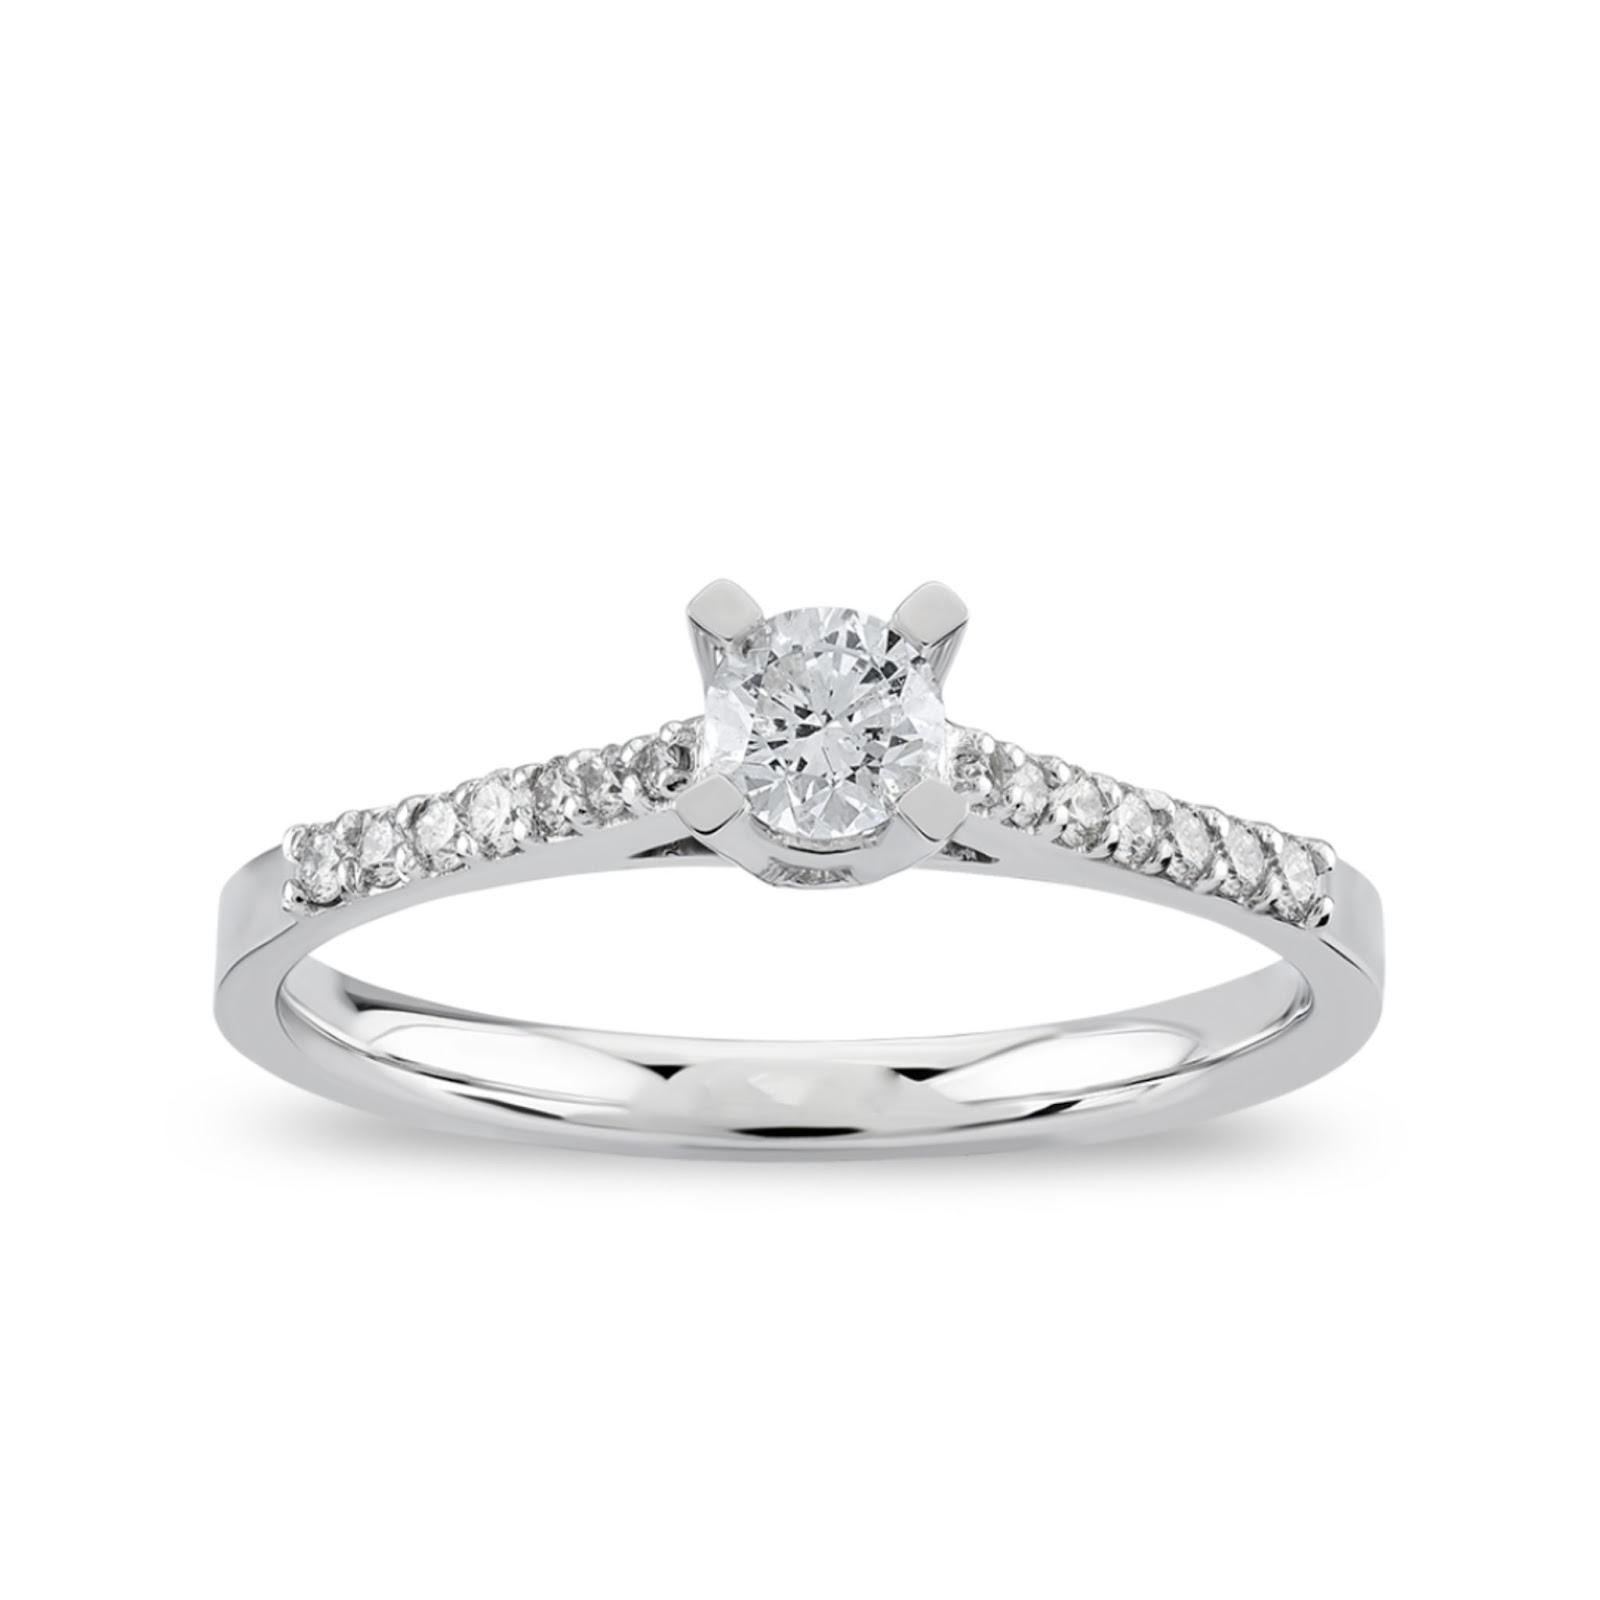 Top 10 Timeless Natural Diamond Ring Designs to Dazzle Your Collection